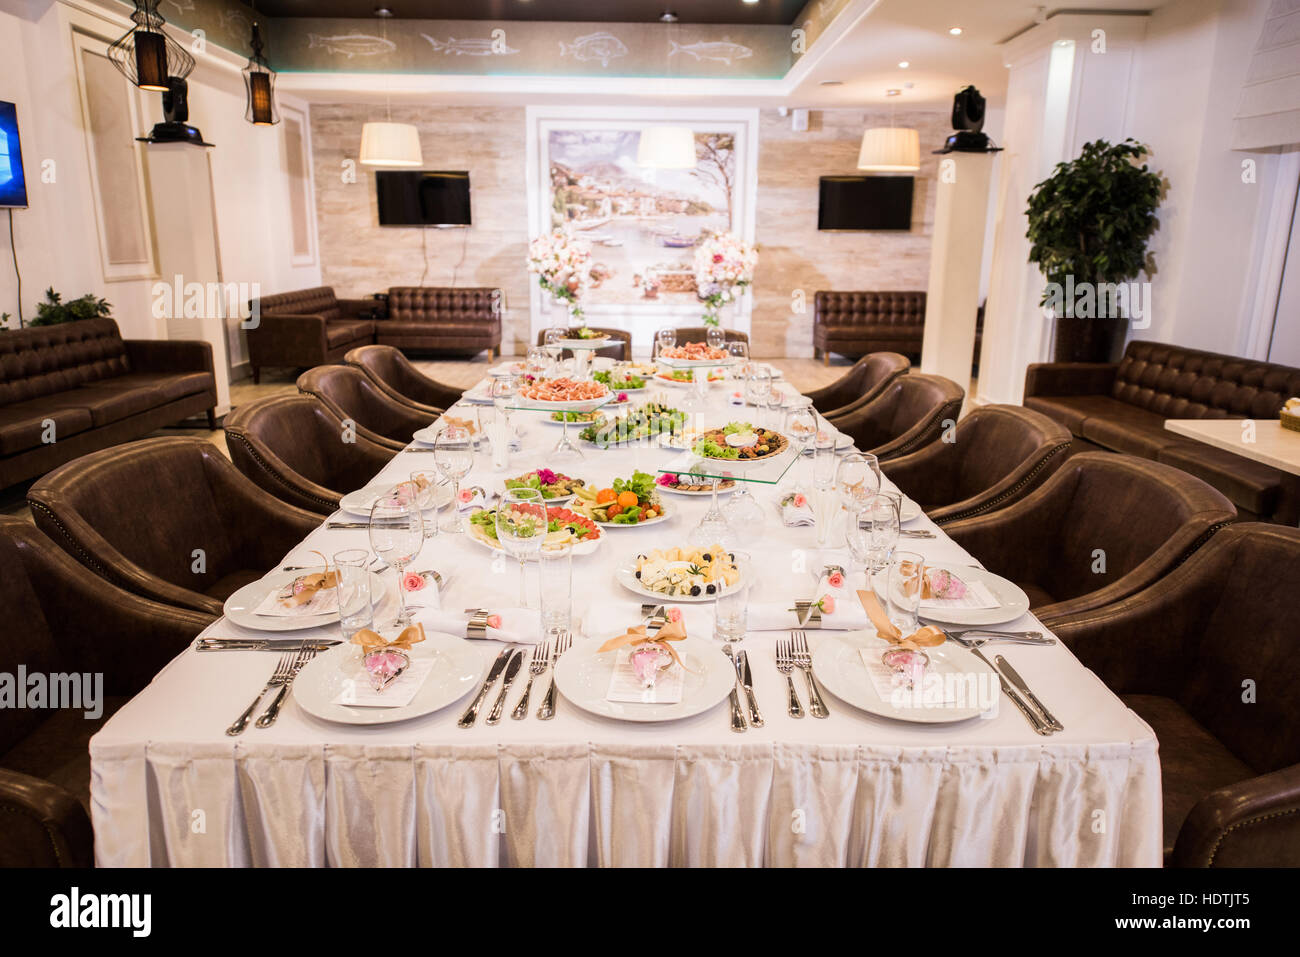 Beautifully organized event - served banquet table ready for guests Stock Photo